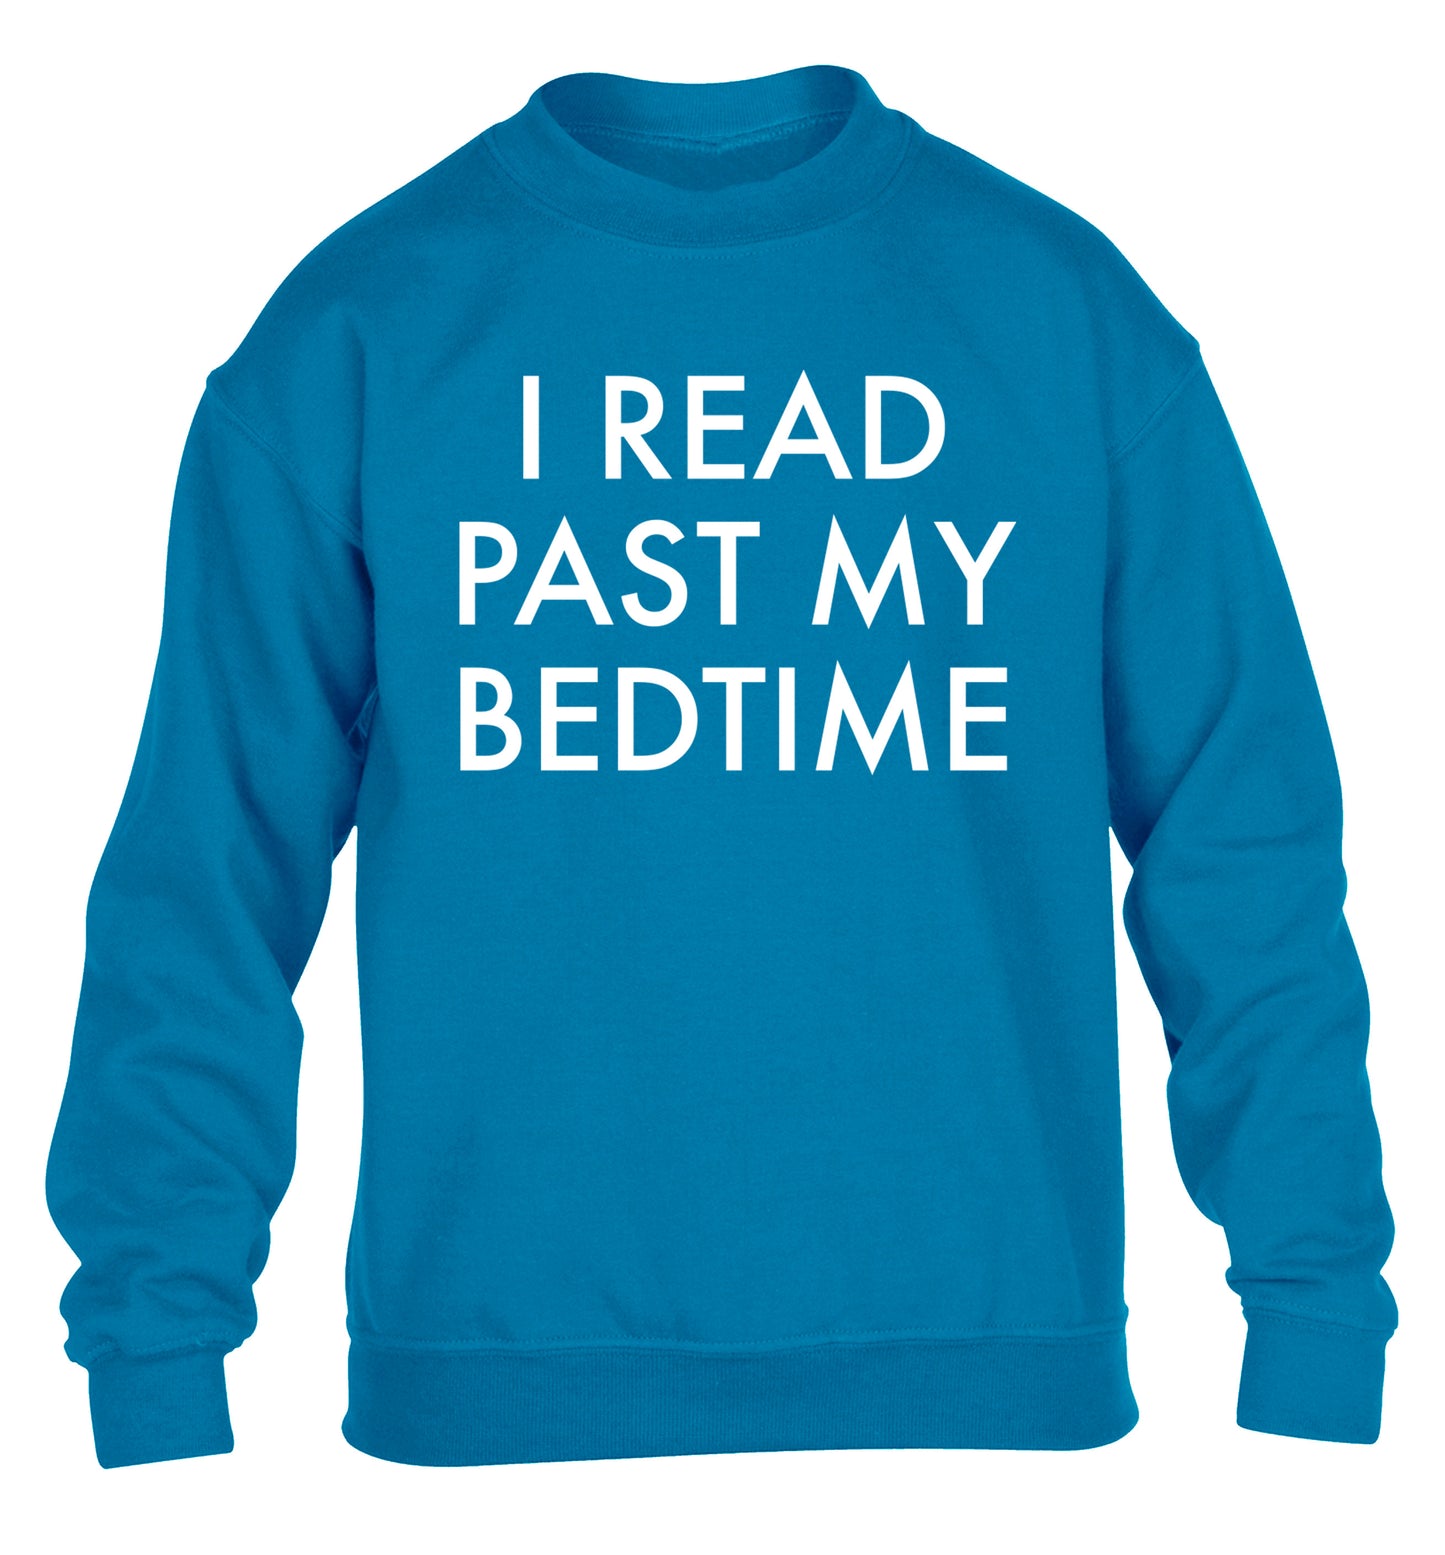 I read past my bedtime children's blue sweater 12-14 Years